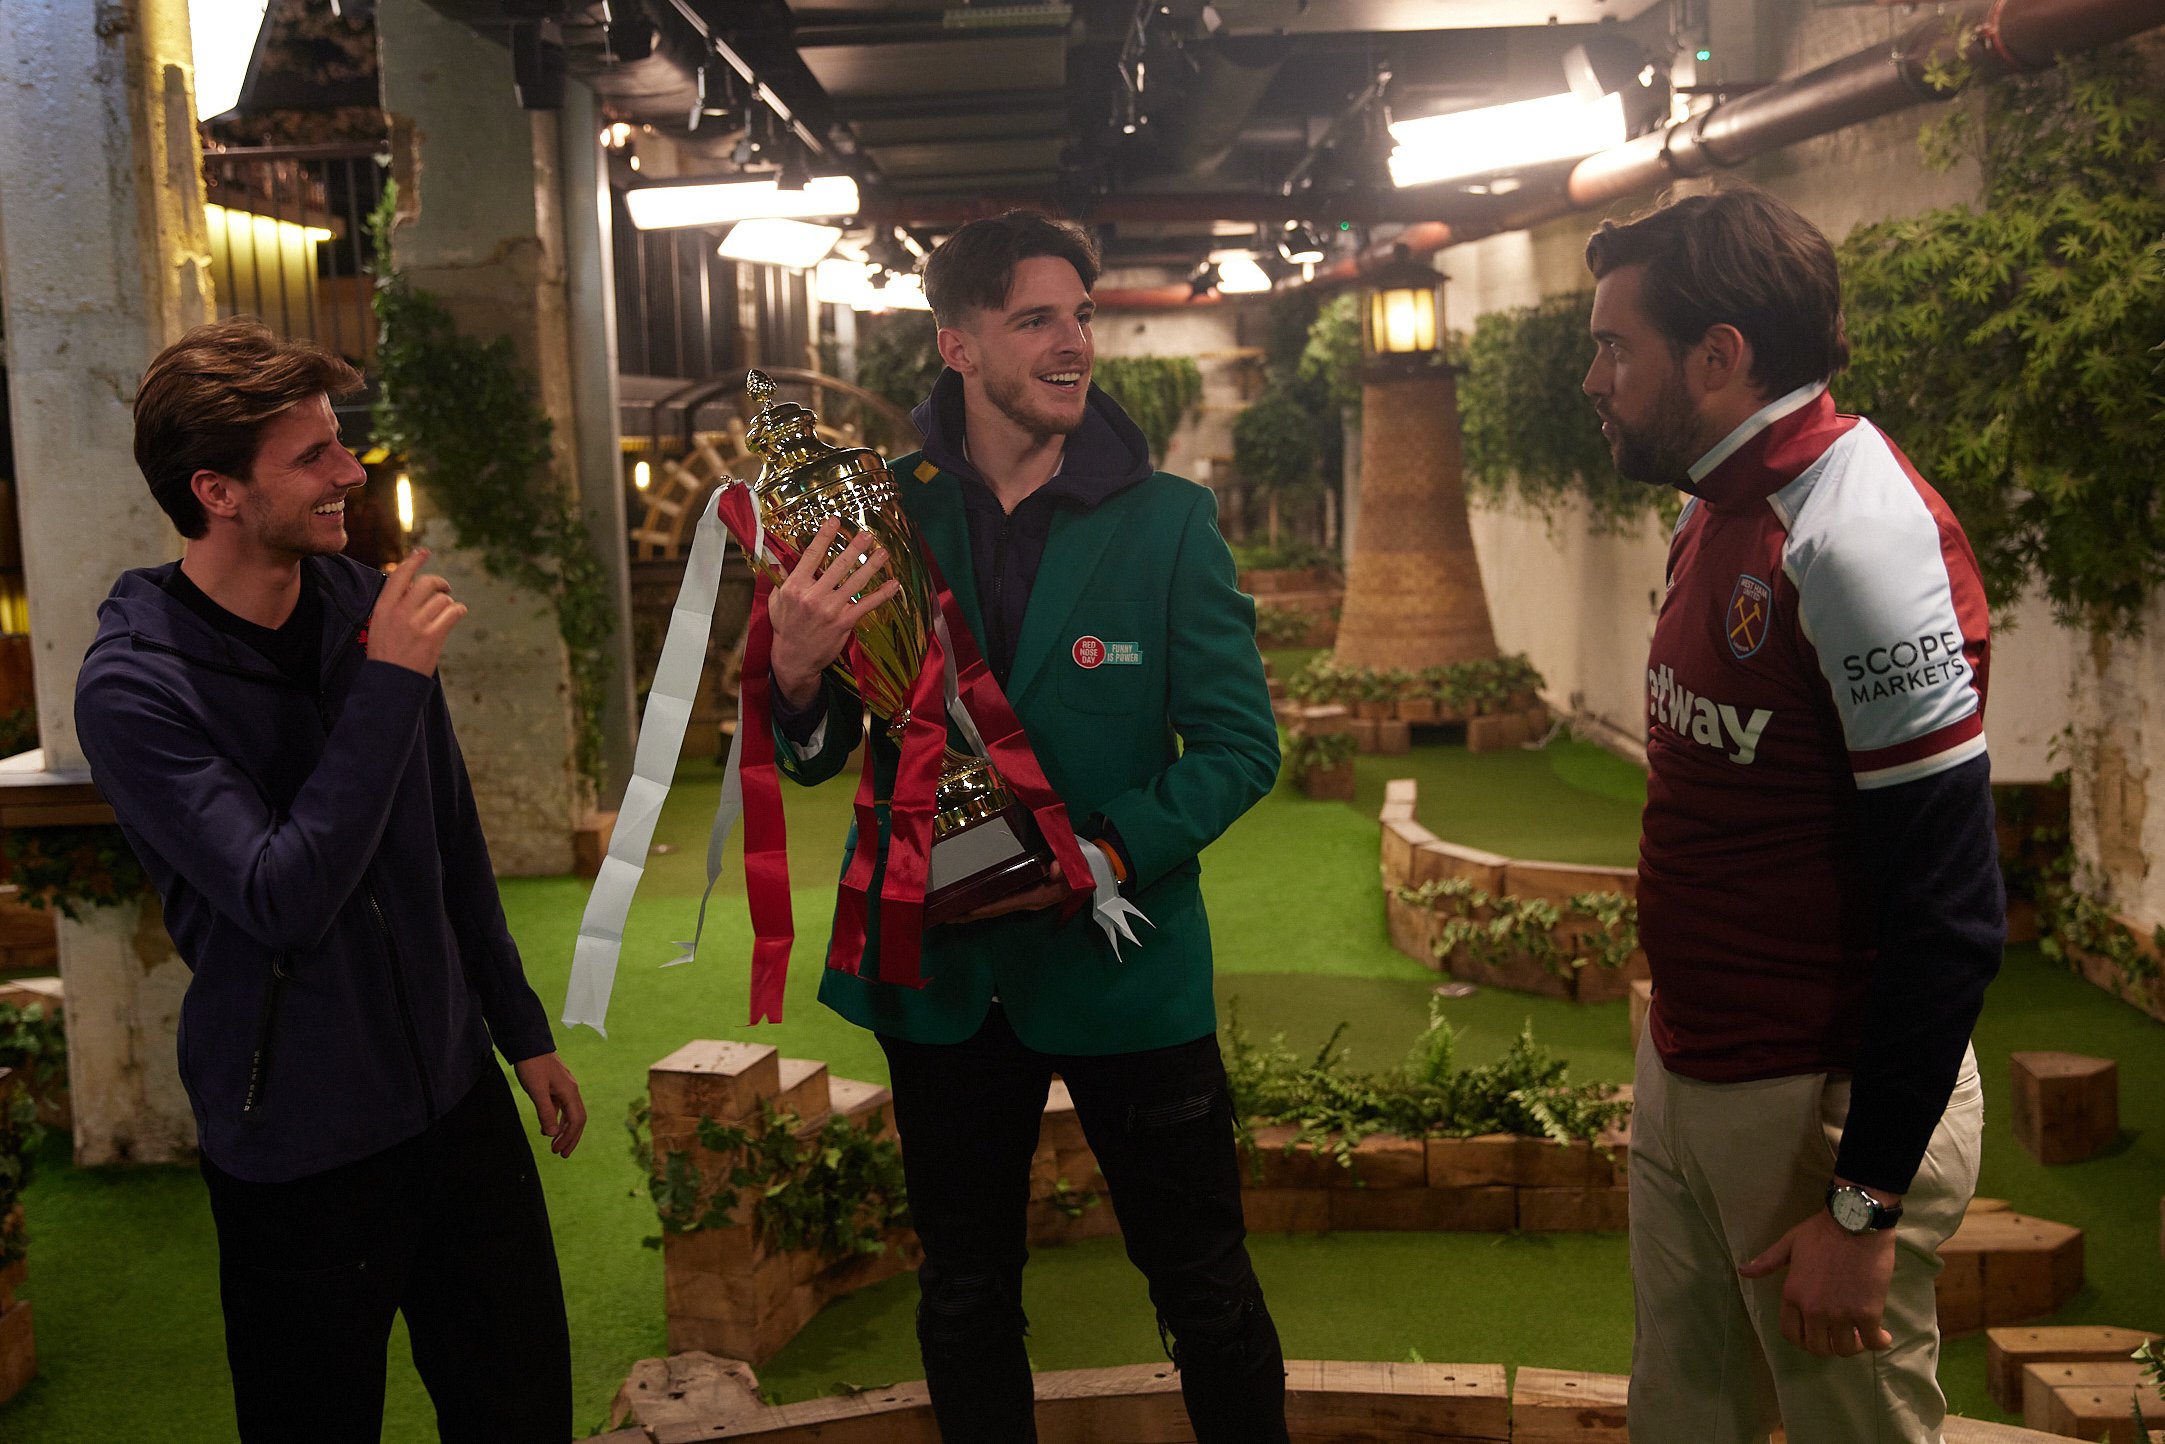 Arsenal supporting celebrity Jack Whitehall pictured wearing West Ham shirt